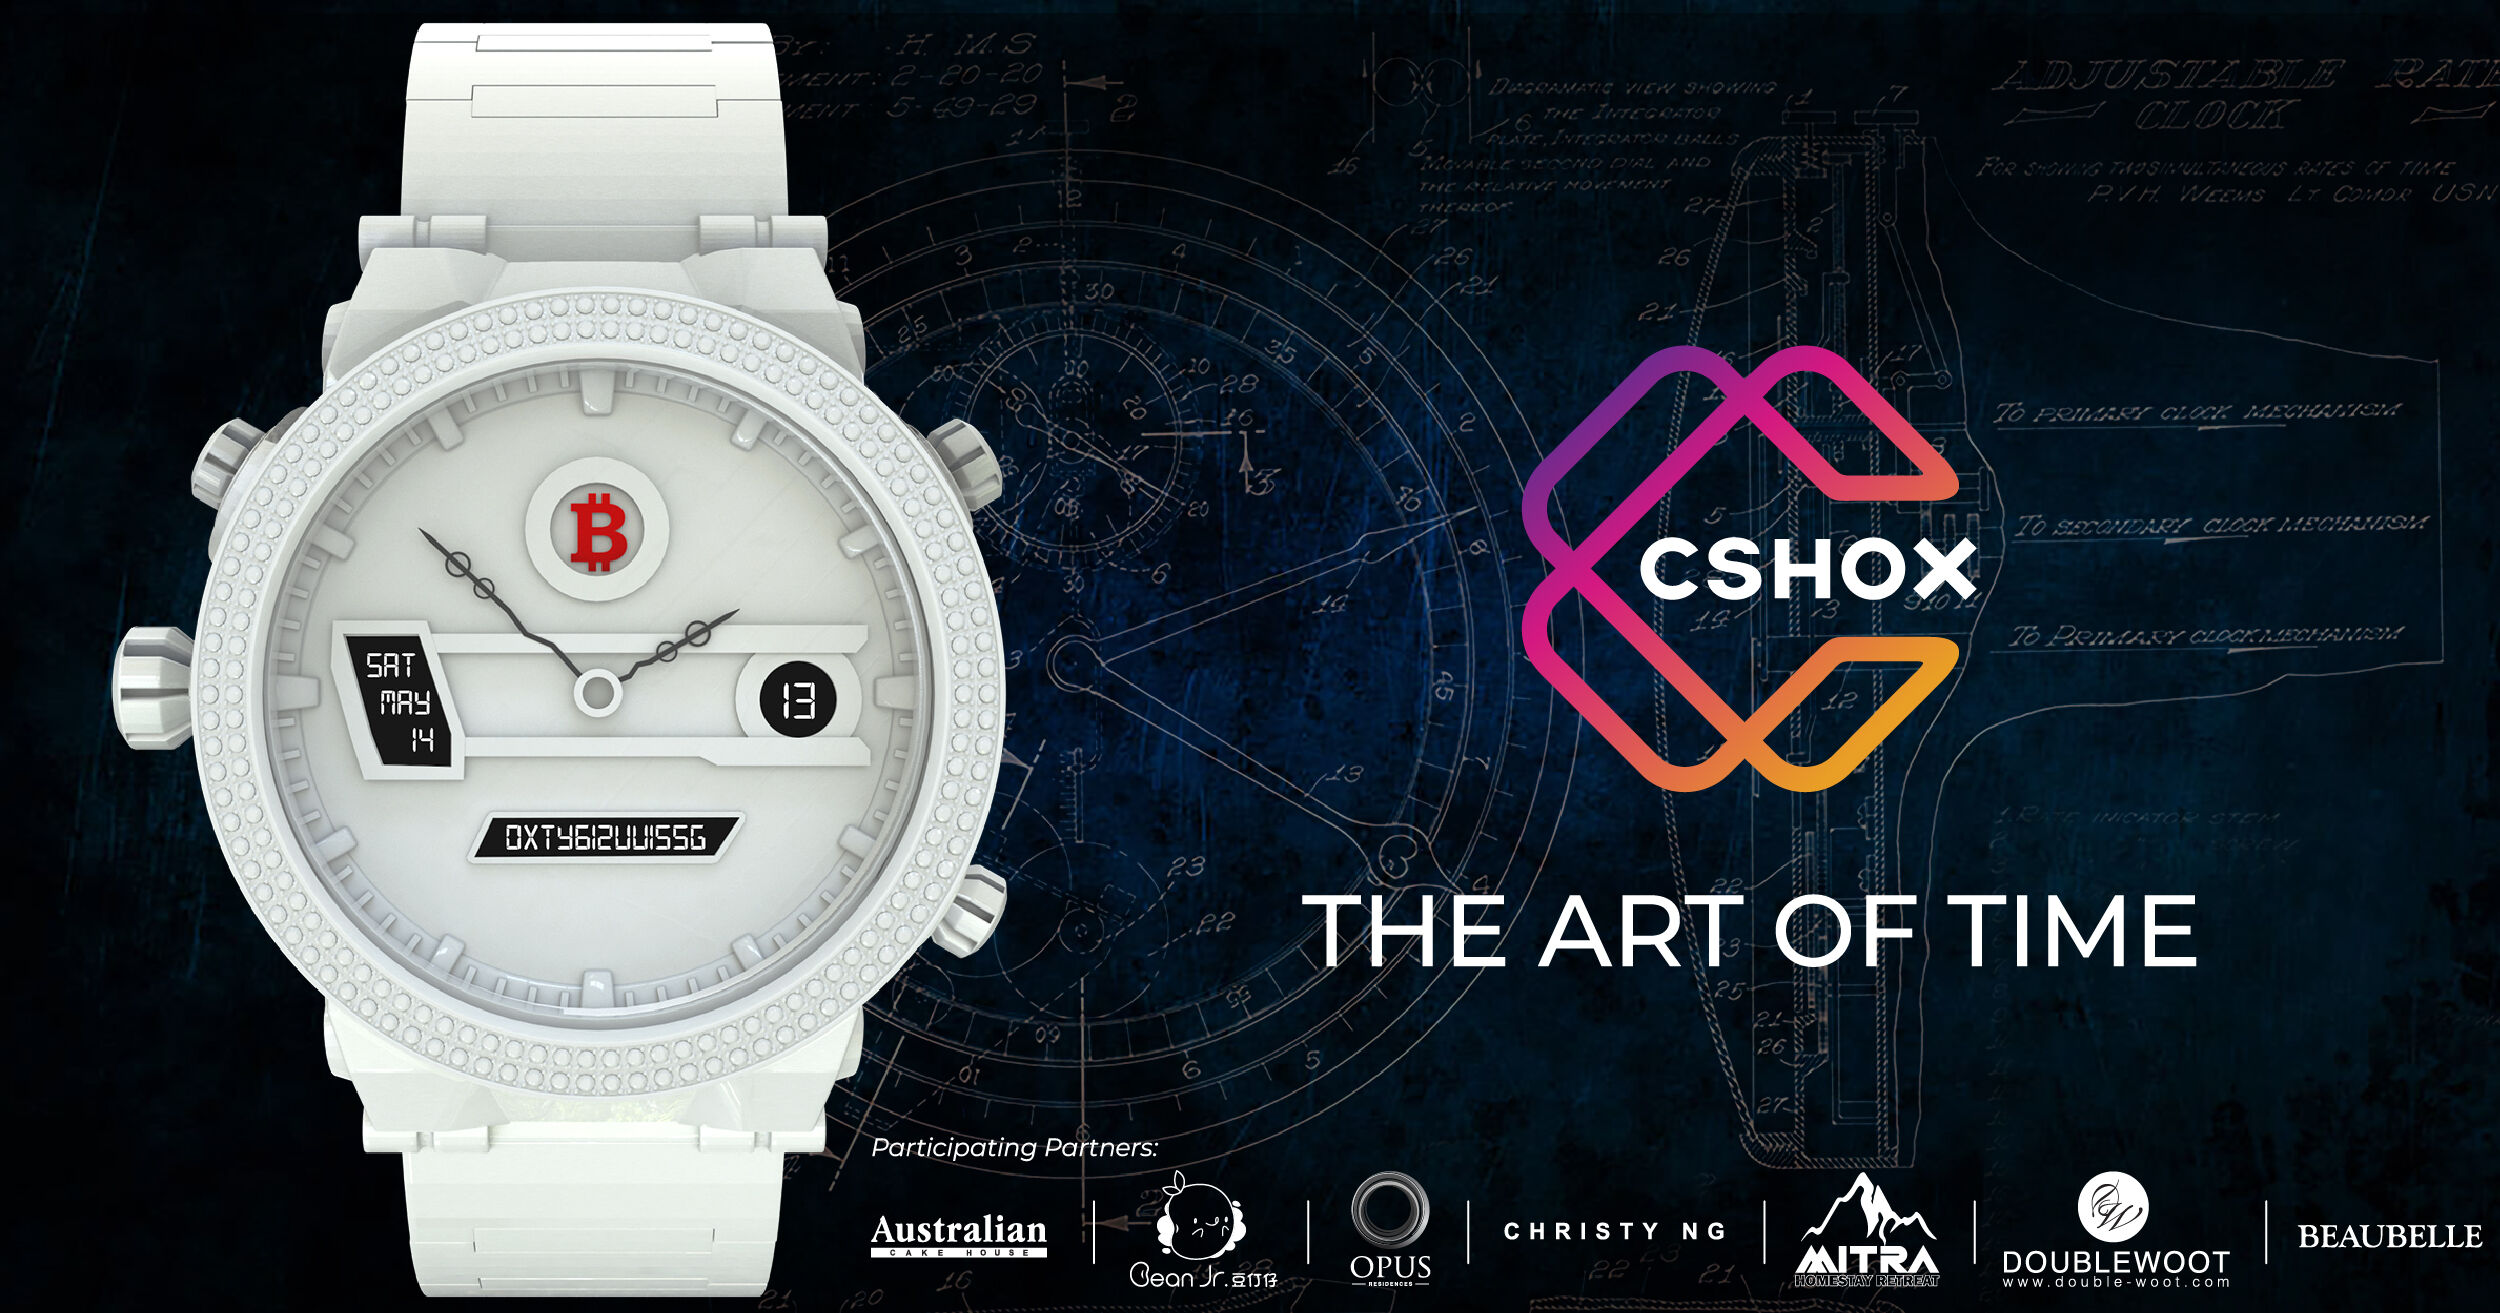 Malaysian Project CShox Introduces NFT Timepiece to the Metaverse